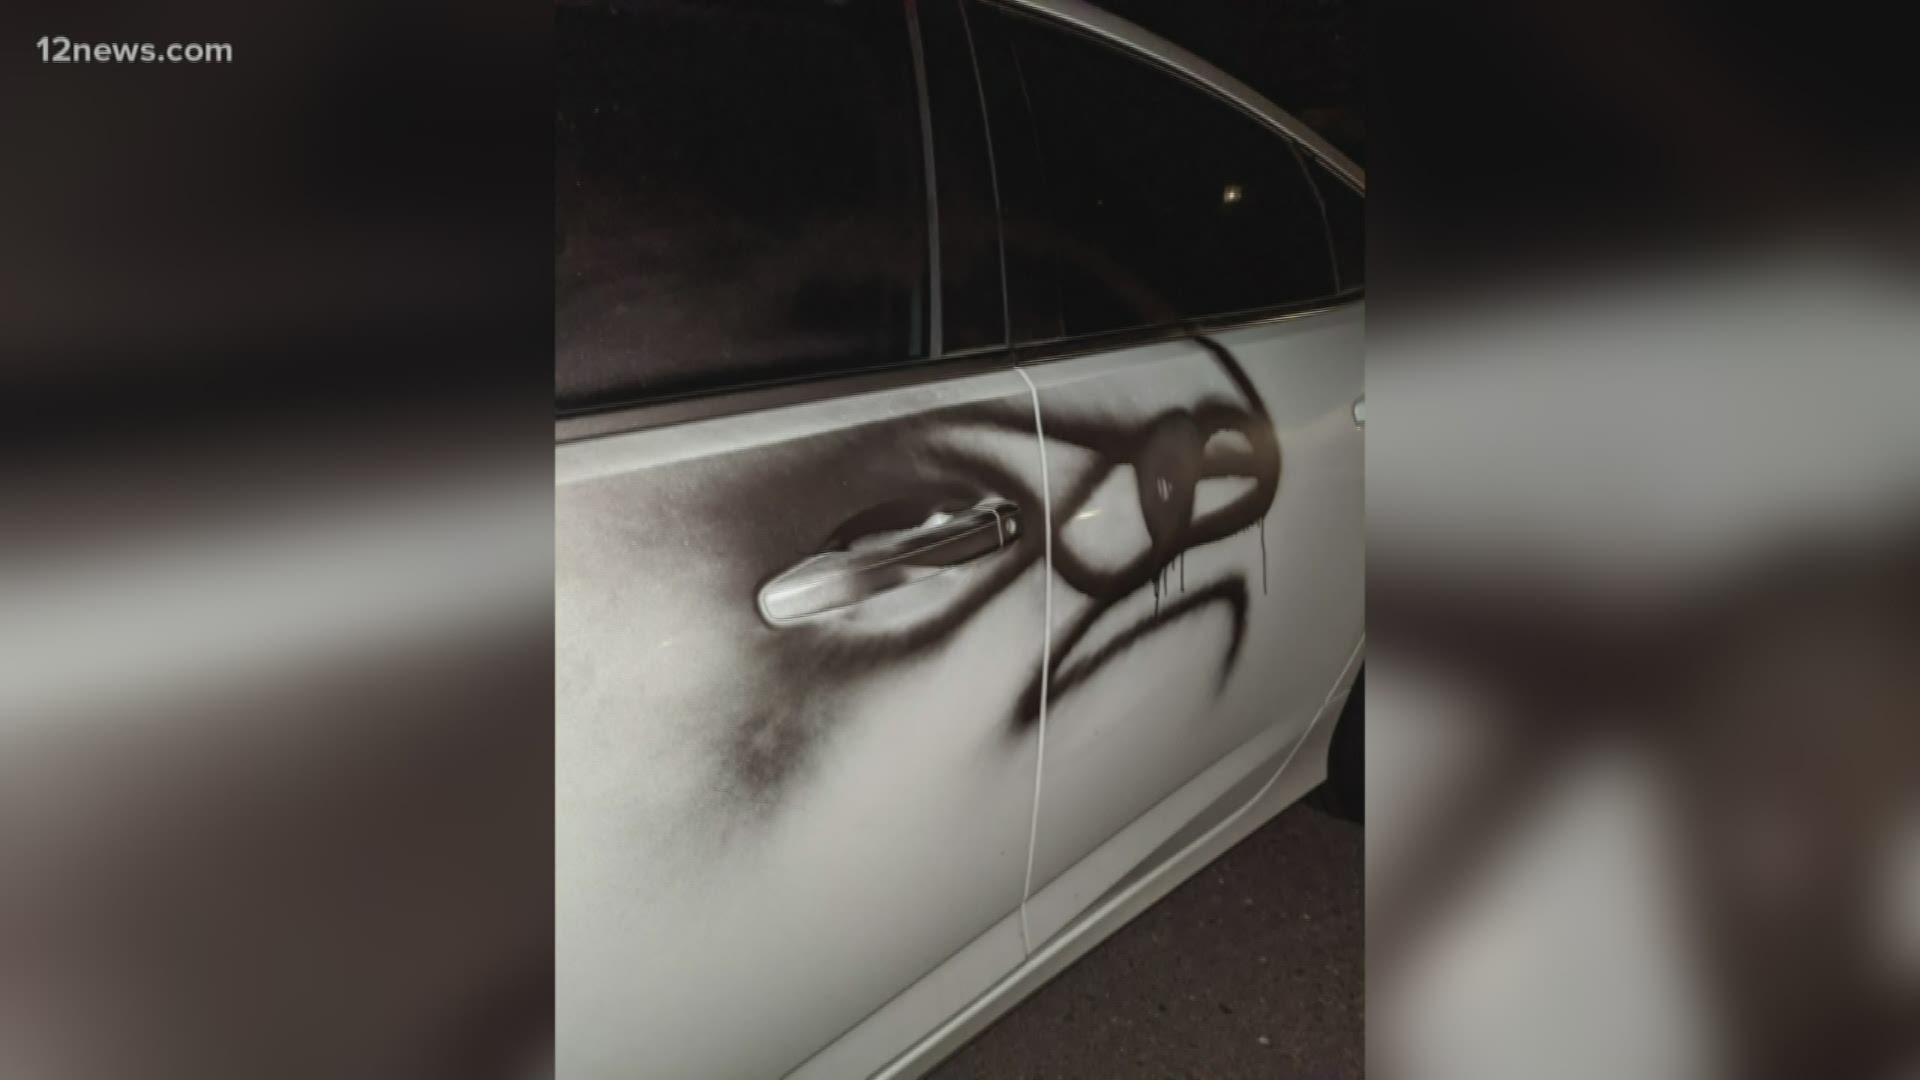 Police said nine incidents were reported recently, and investigators are working with residents to find out who's behind the vandalism.